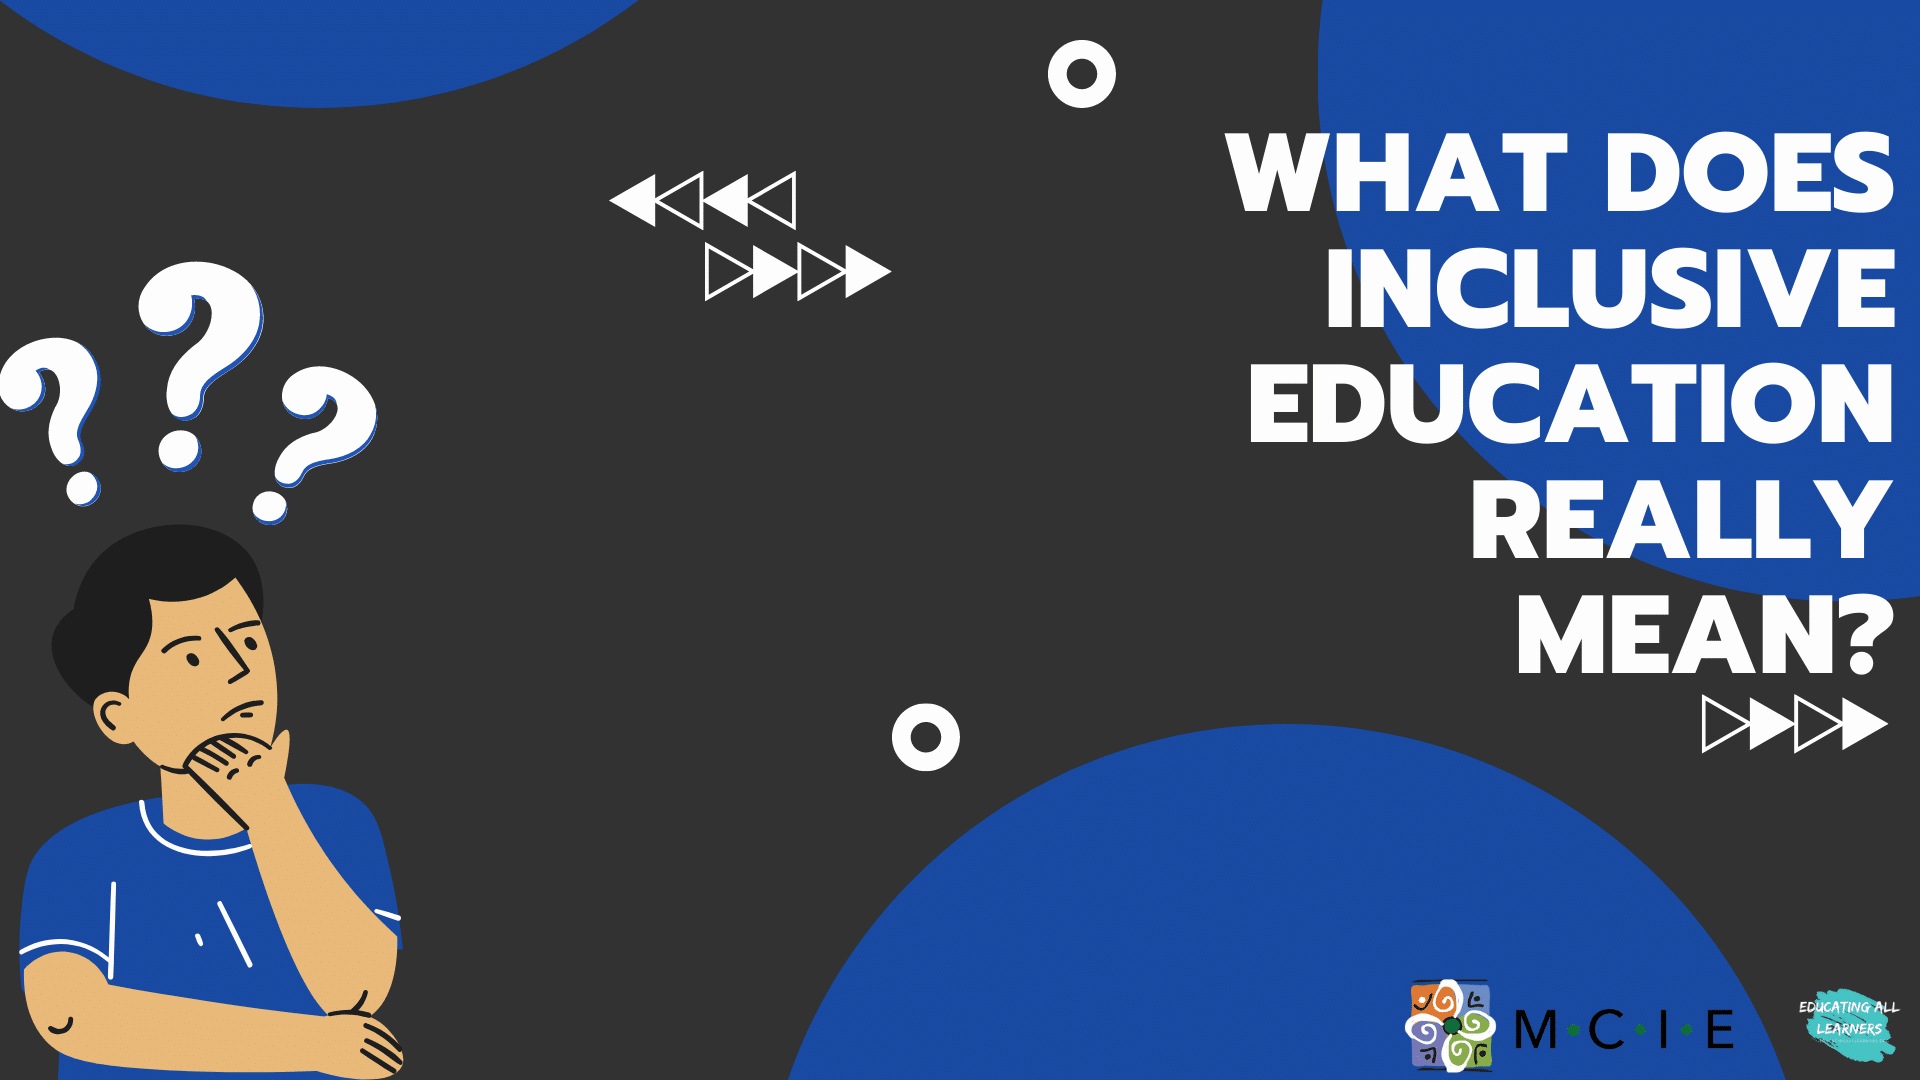 What Does Inclusive Education Really Mean?